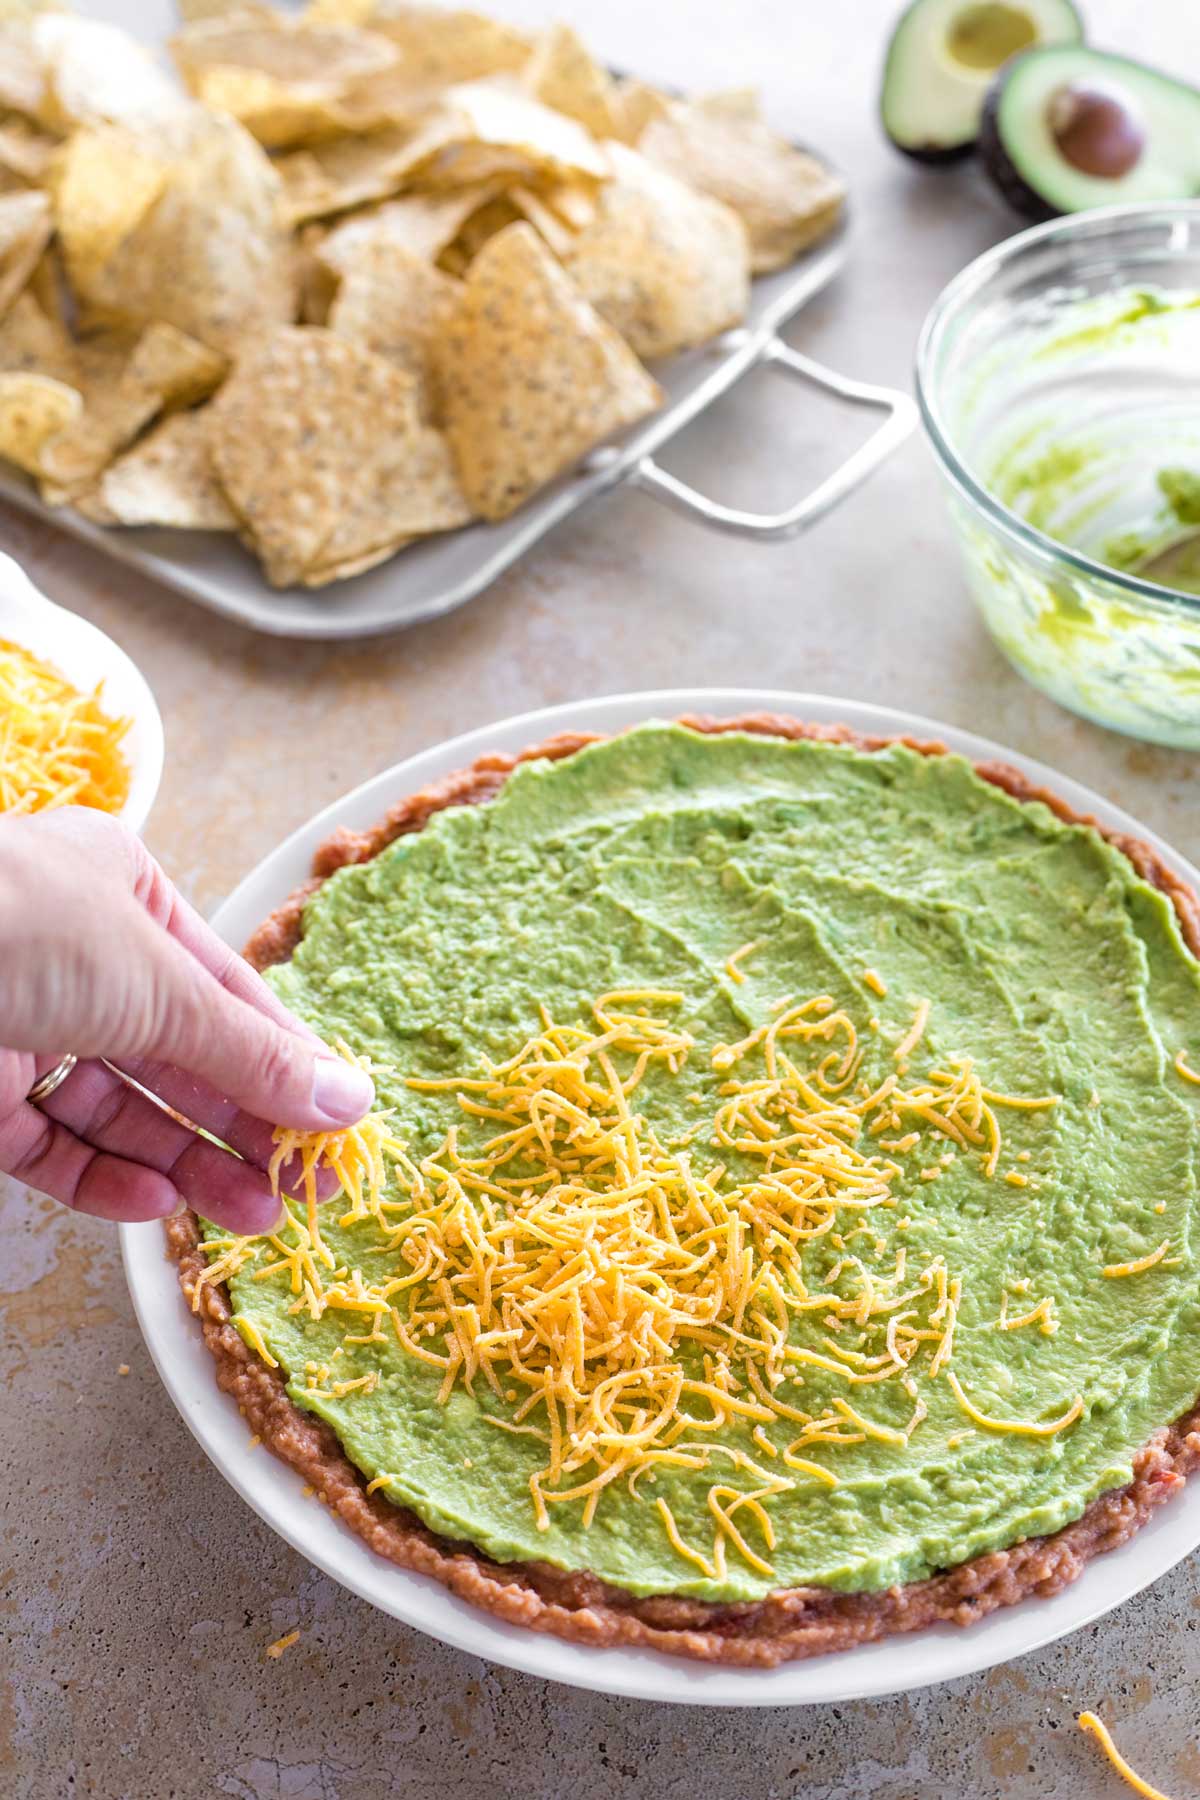 Hand sprinkling cheese on top of guacamole layer.